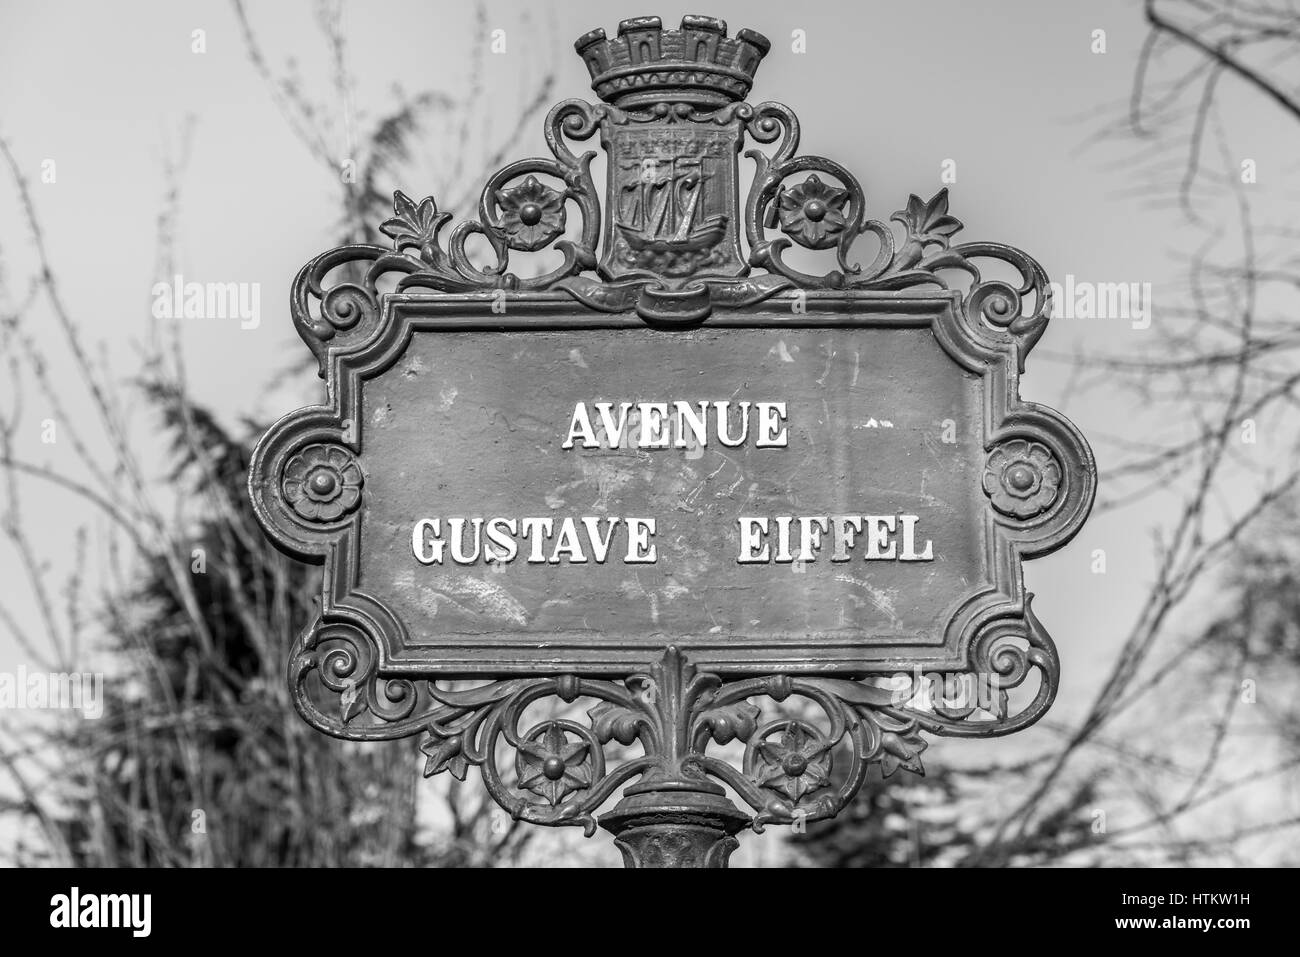 Avenue Gustave Eiffel street sign located in the Champ de Mars in Paris France. Stock Photo